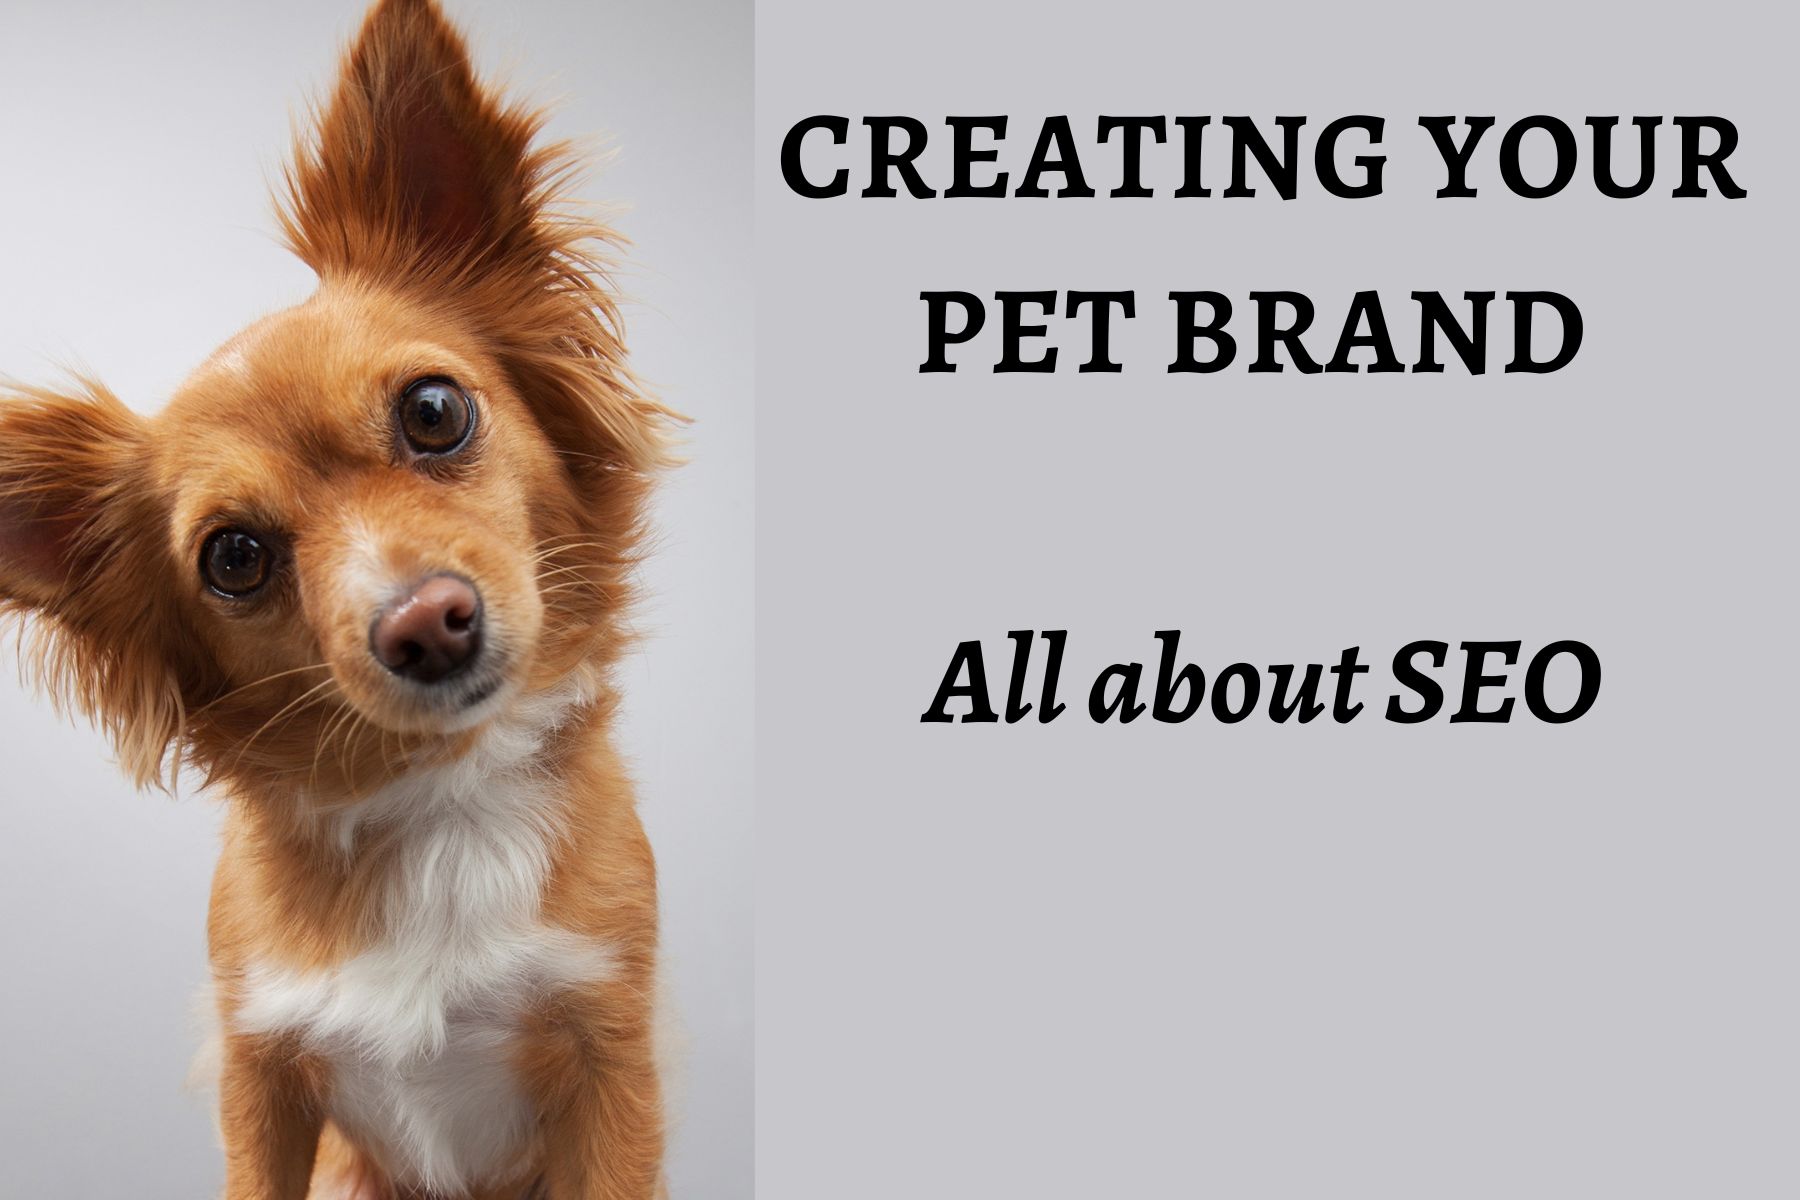 Creating your Pet Brand: SEO